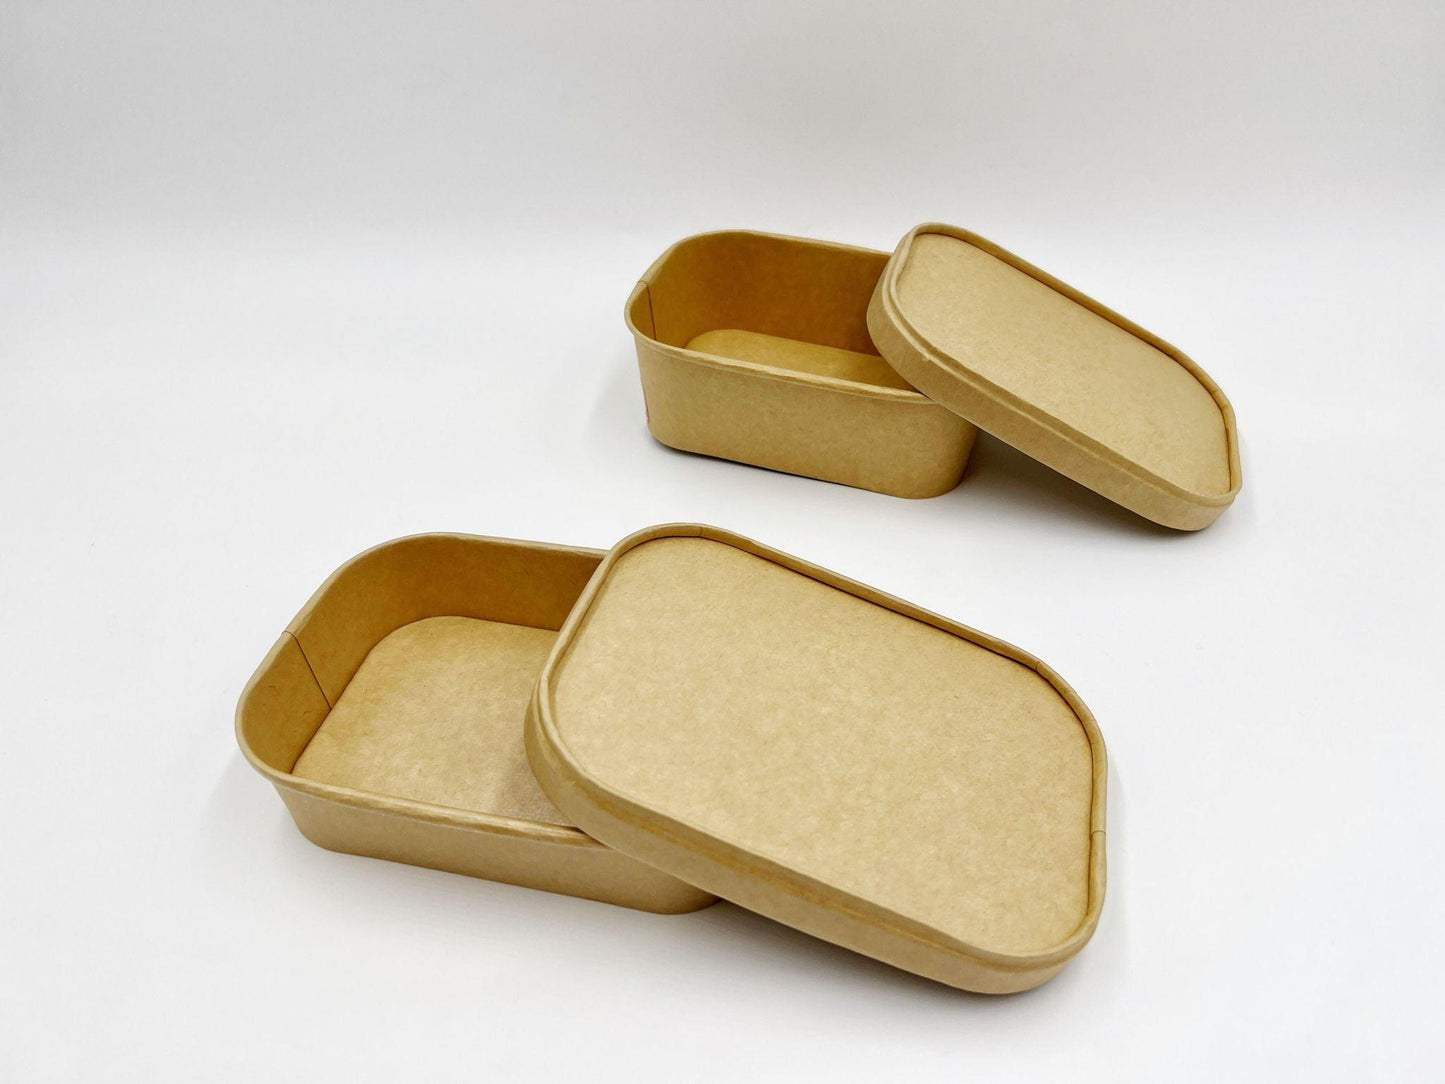 Rectangular paper containers